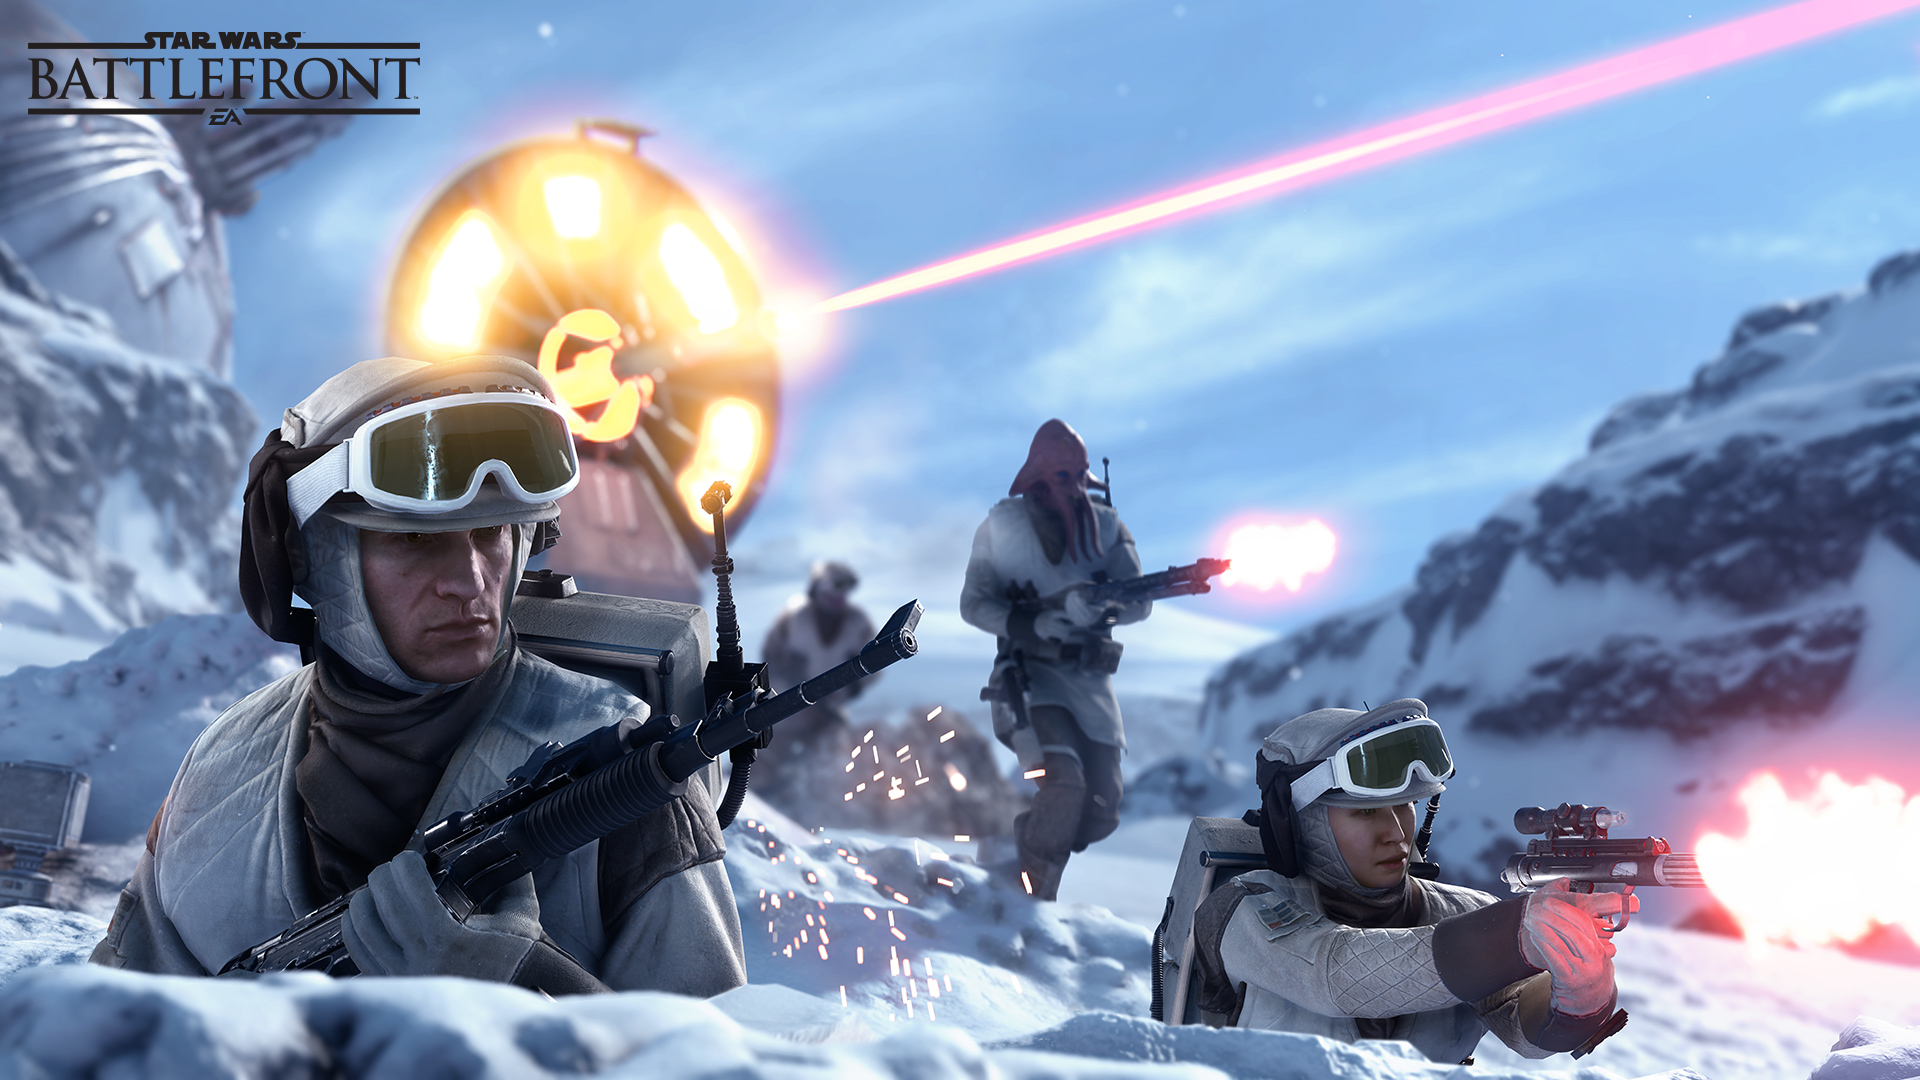 Star Wars Battlefront 3 reportedly shelved in favor of new games at Respawn thumbnail